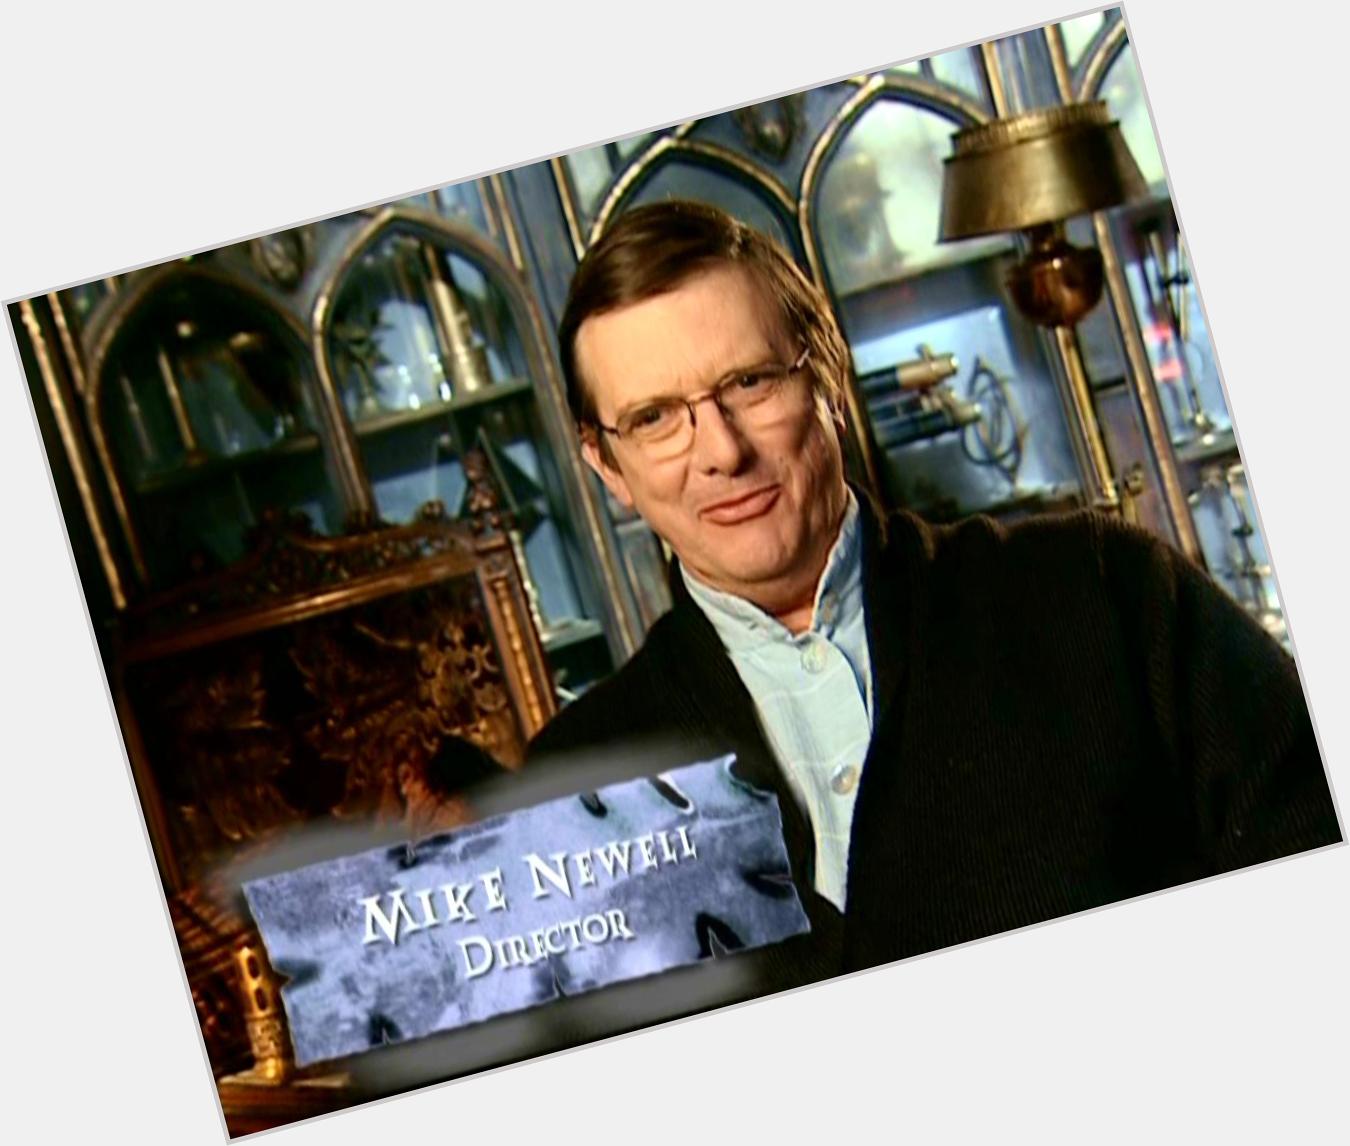 Happy 73rd Birthday, Mike Newell! He was the director of the film adaptation of Harry Potter and the Goblet of Fire. 